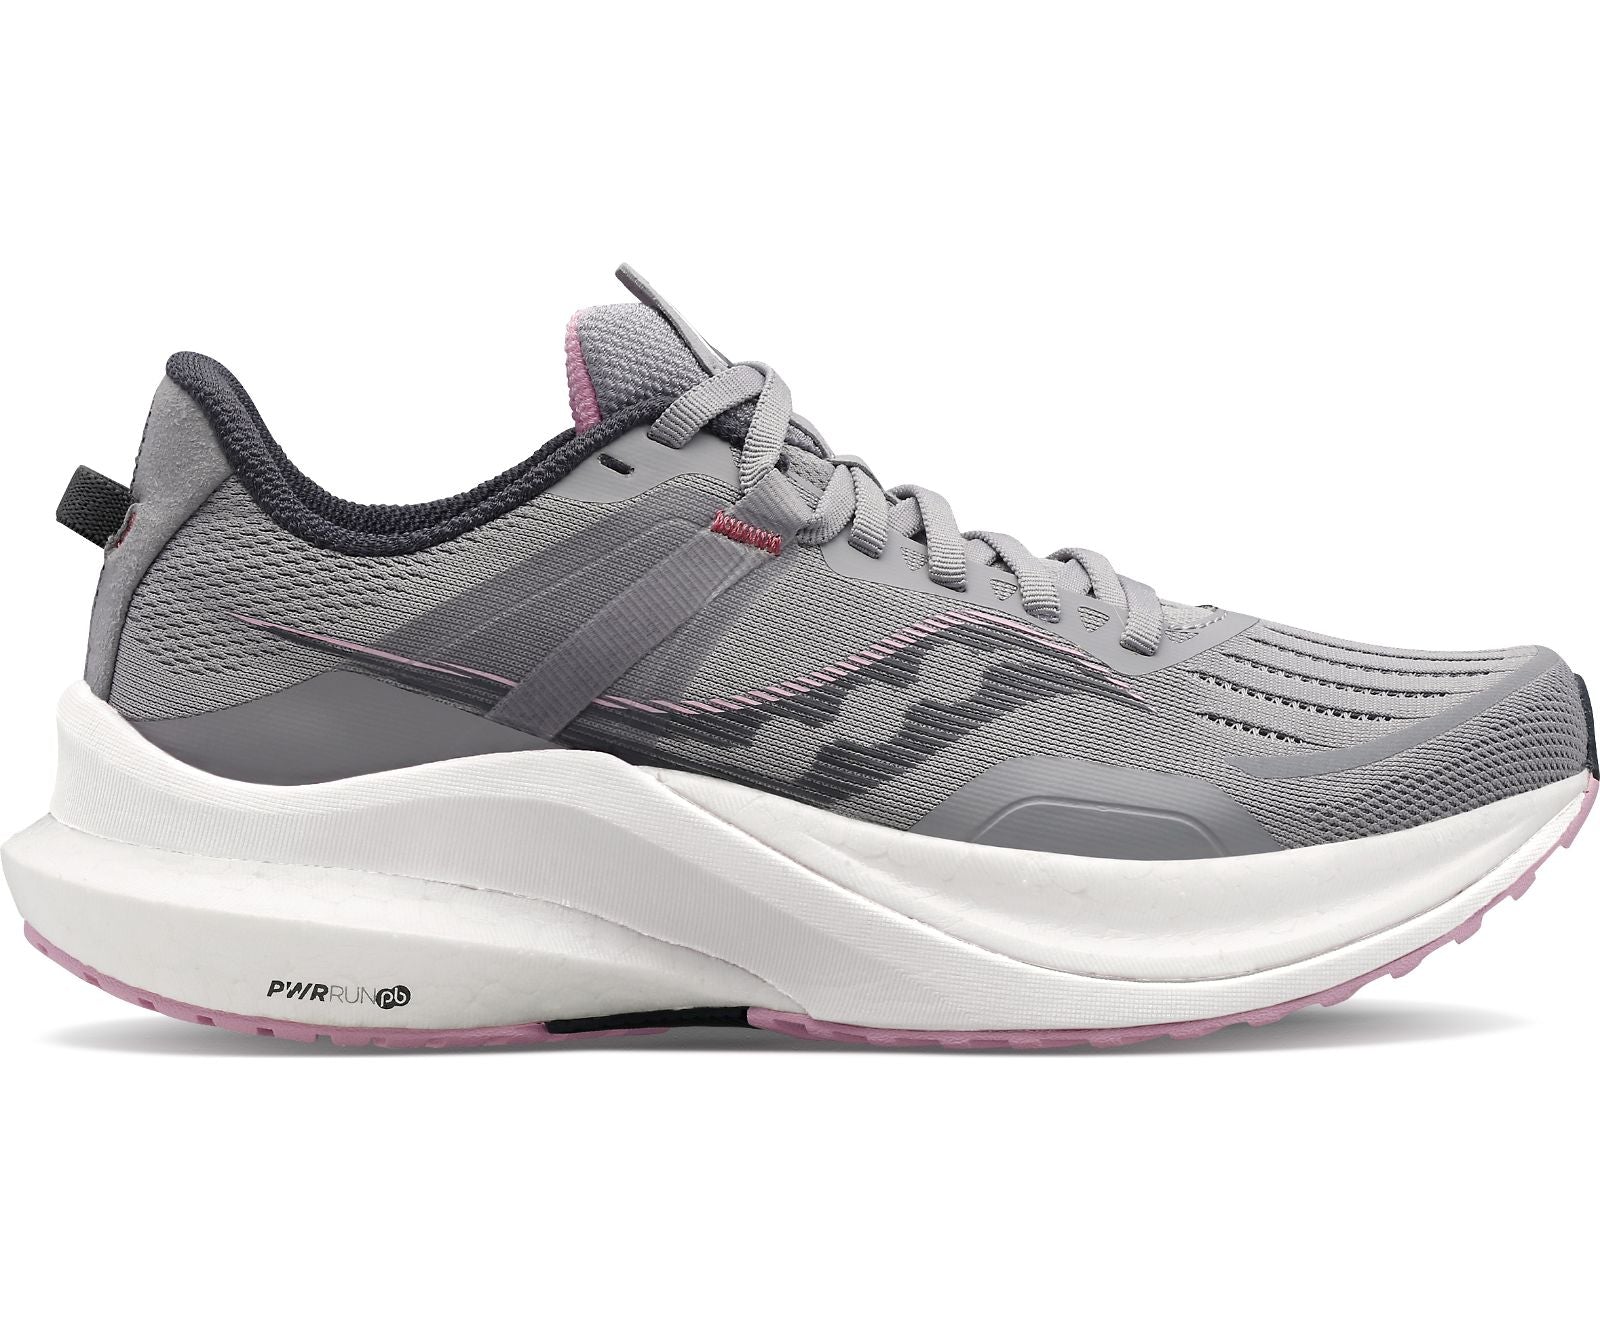 Lateral view of the Women's Tempus in the wide "D" width by Saucony in the color Alloy/Quartz 